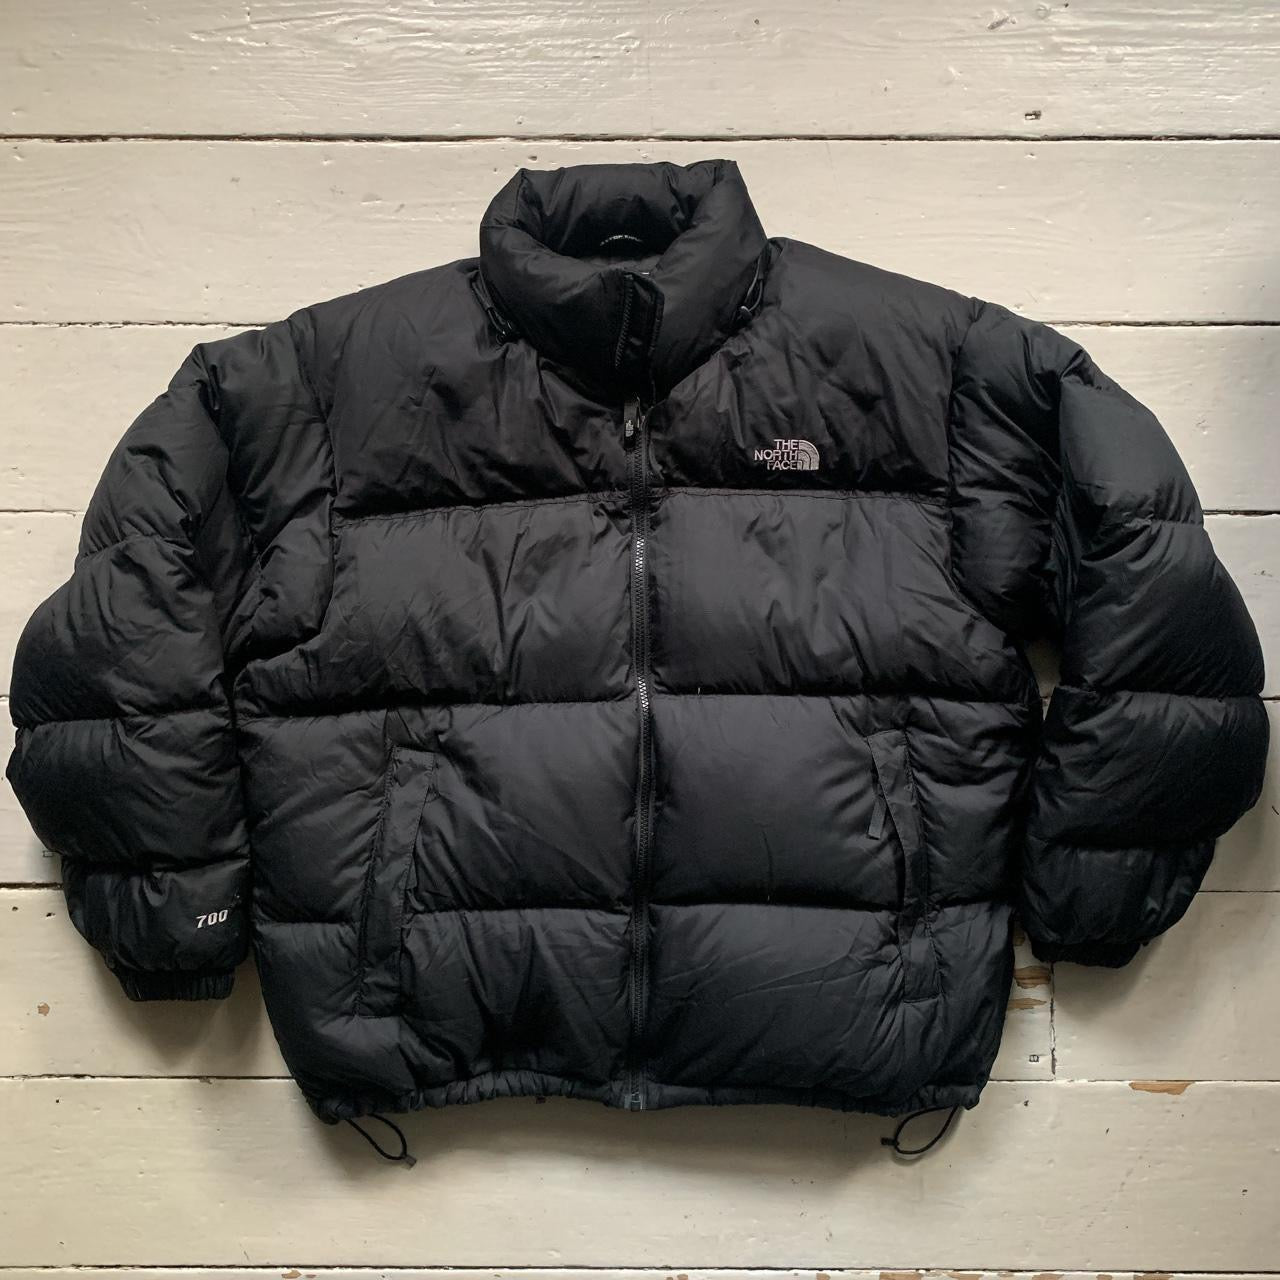 The North Face Nuptse 700 Puffer (XL)